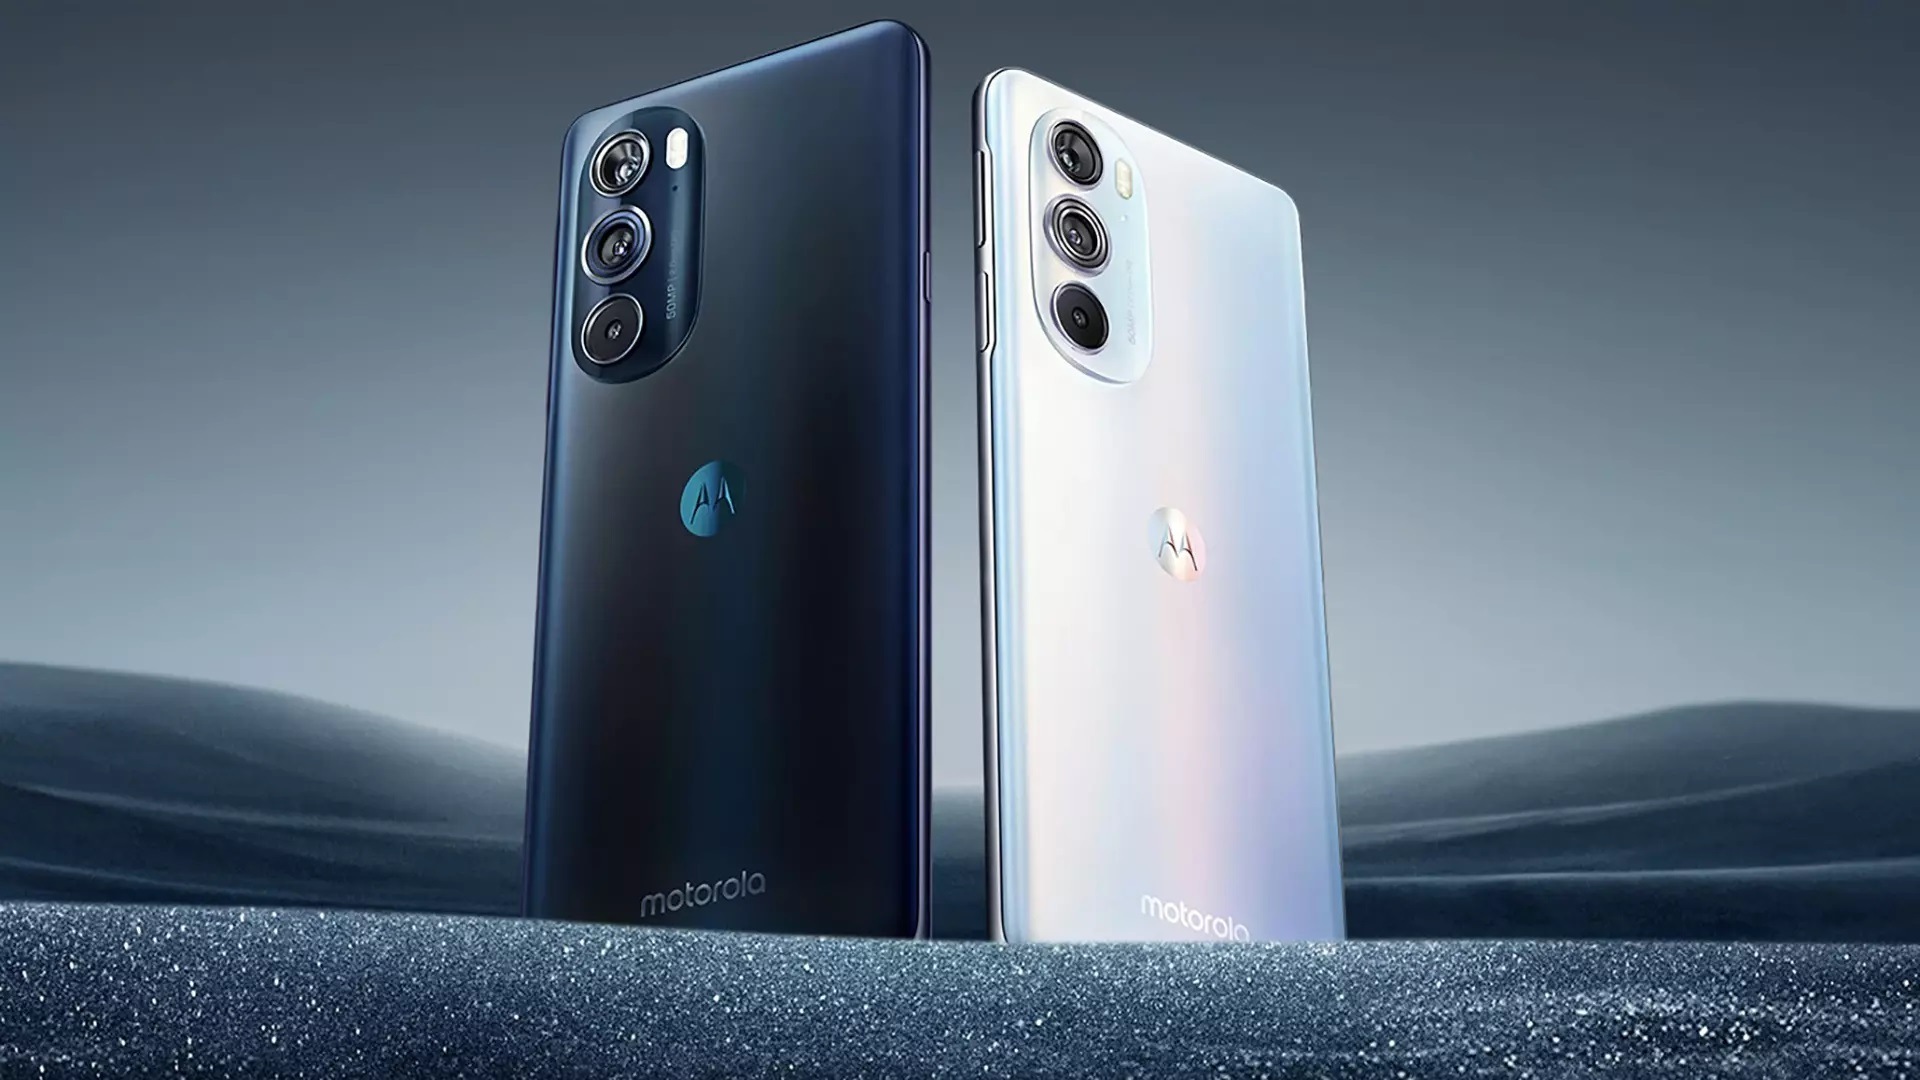 Motorola's next high-end phone can throw everything on the floor